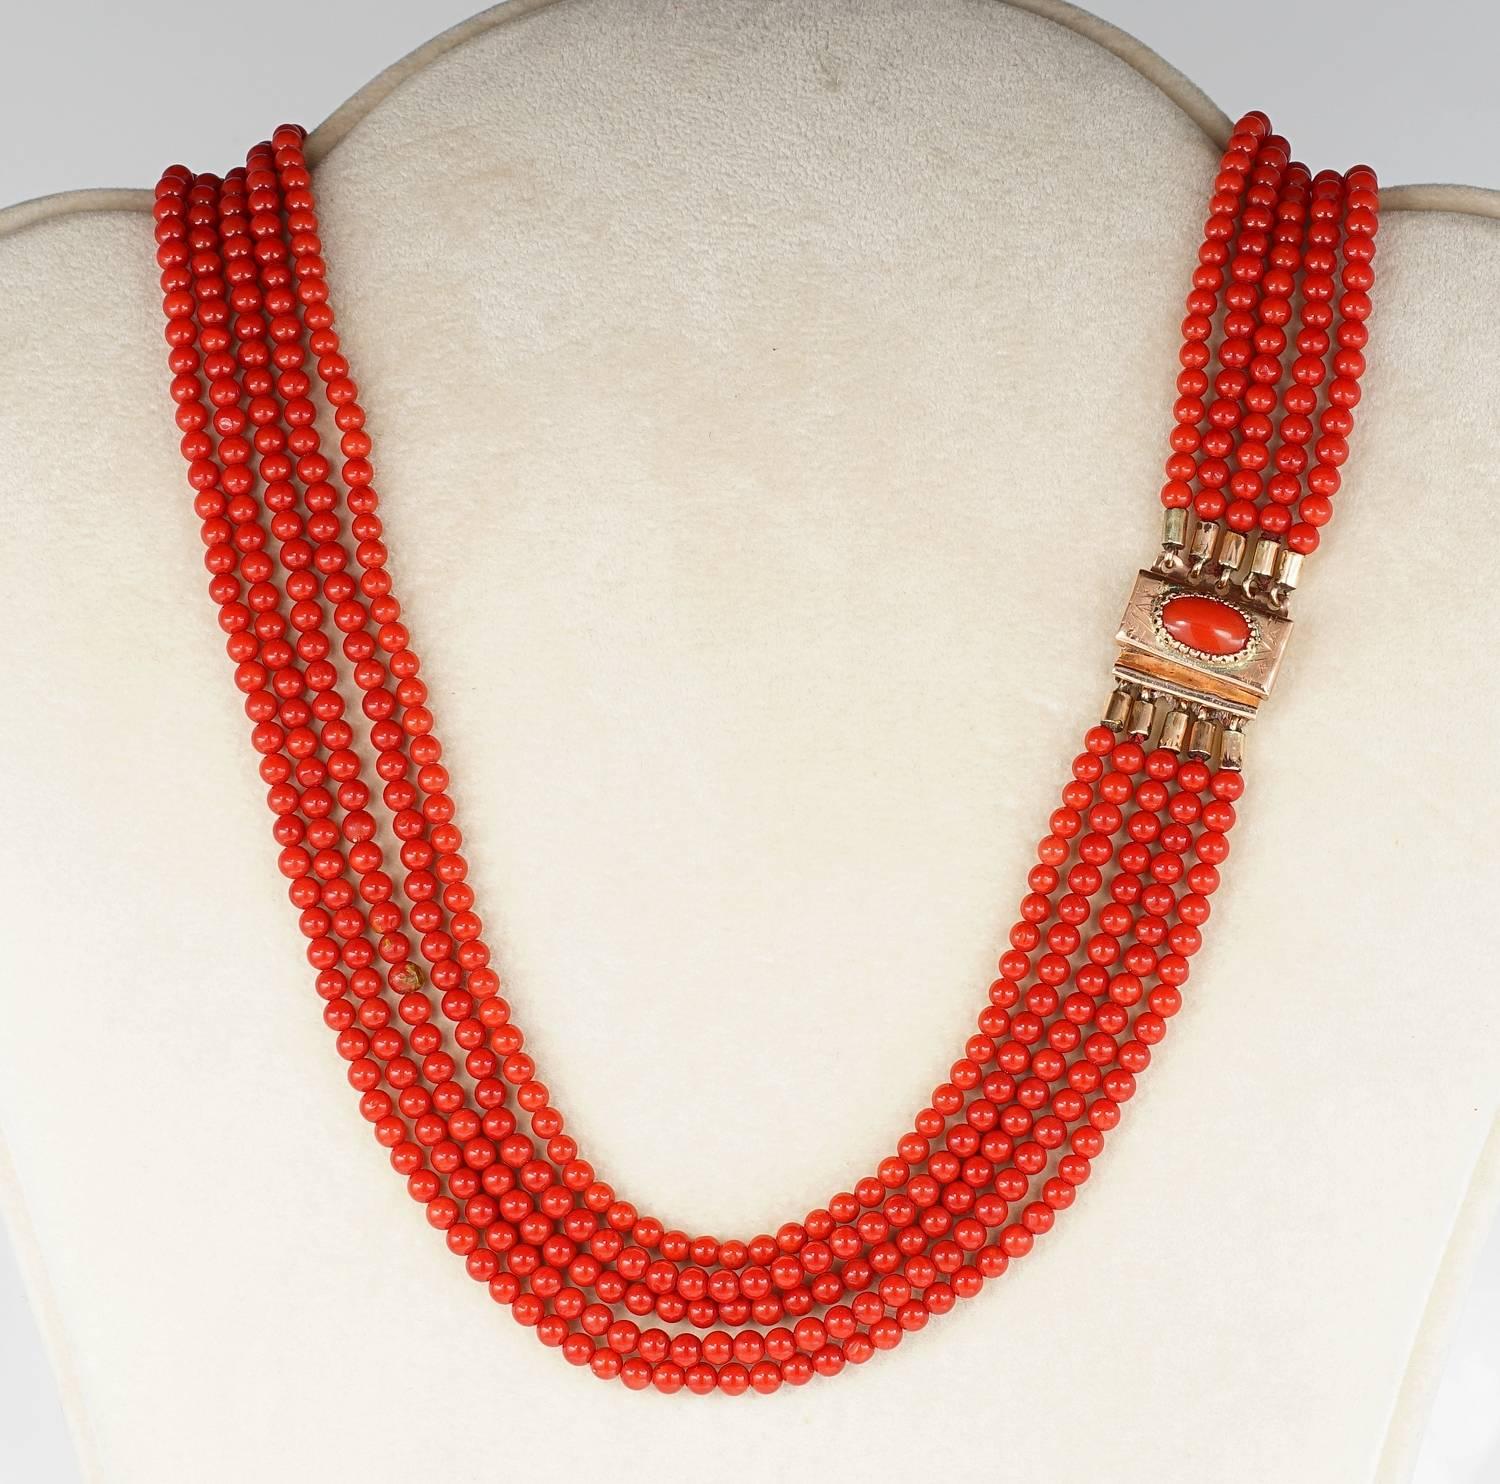 Magnificent five strands of untreated OX Blood intense Red Natural Coral make this genuine Victorian necklace. 1880 ca. Italian origin.
Each bead is 4 mm. in diameter - all even and selected hand turned - stunning colour! Completed by the original